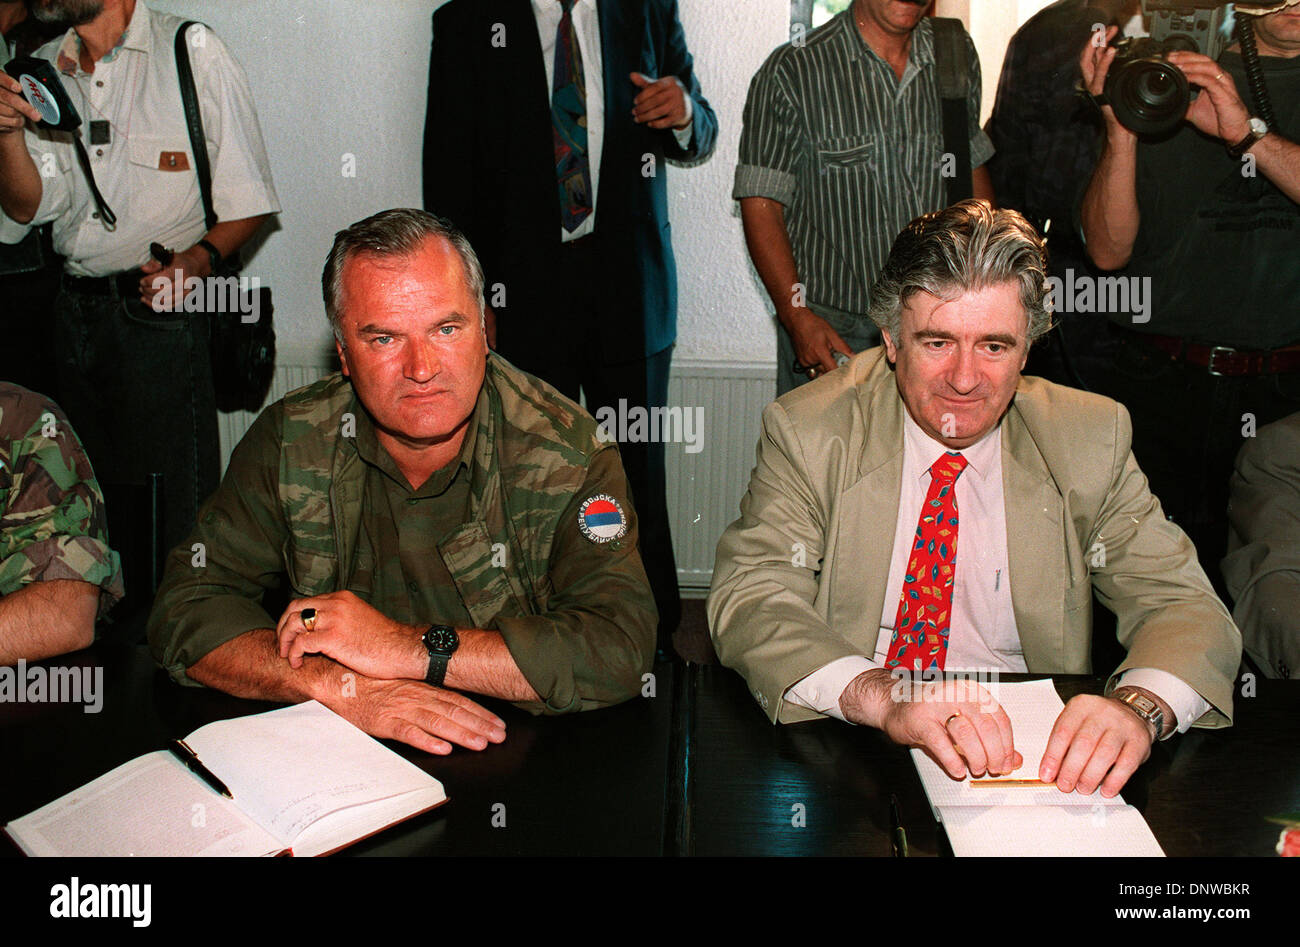 FILE PHOTO - Fugitive Bosnian Serb war crimes suspect RATKO MLADIC has been arrested in Serbia after 16 years on the run.  Mladic, 69, was found in the village of Lazarevo in northern Serbia where had been living under an assumed name. He faces charges over the massacre of at least 7,500 Bosnian Muslim men and boys at Srebrenica in 1995.  PICTURED:  Jul. 02, 1995 - Pale, Bosnia and Stock Photo